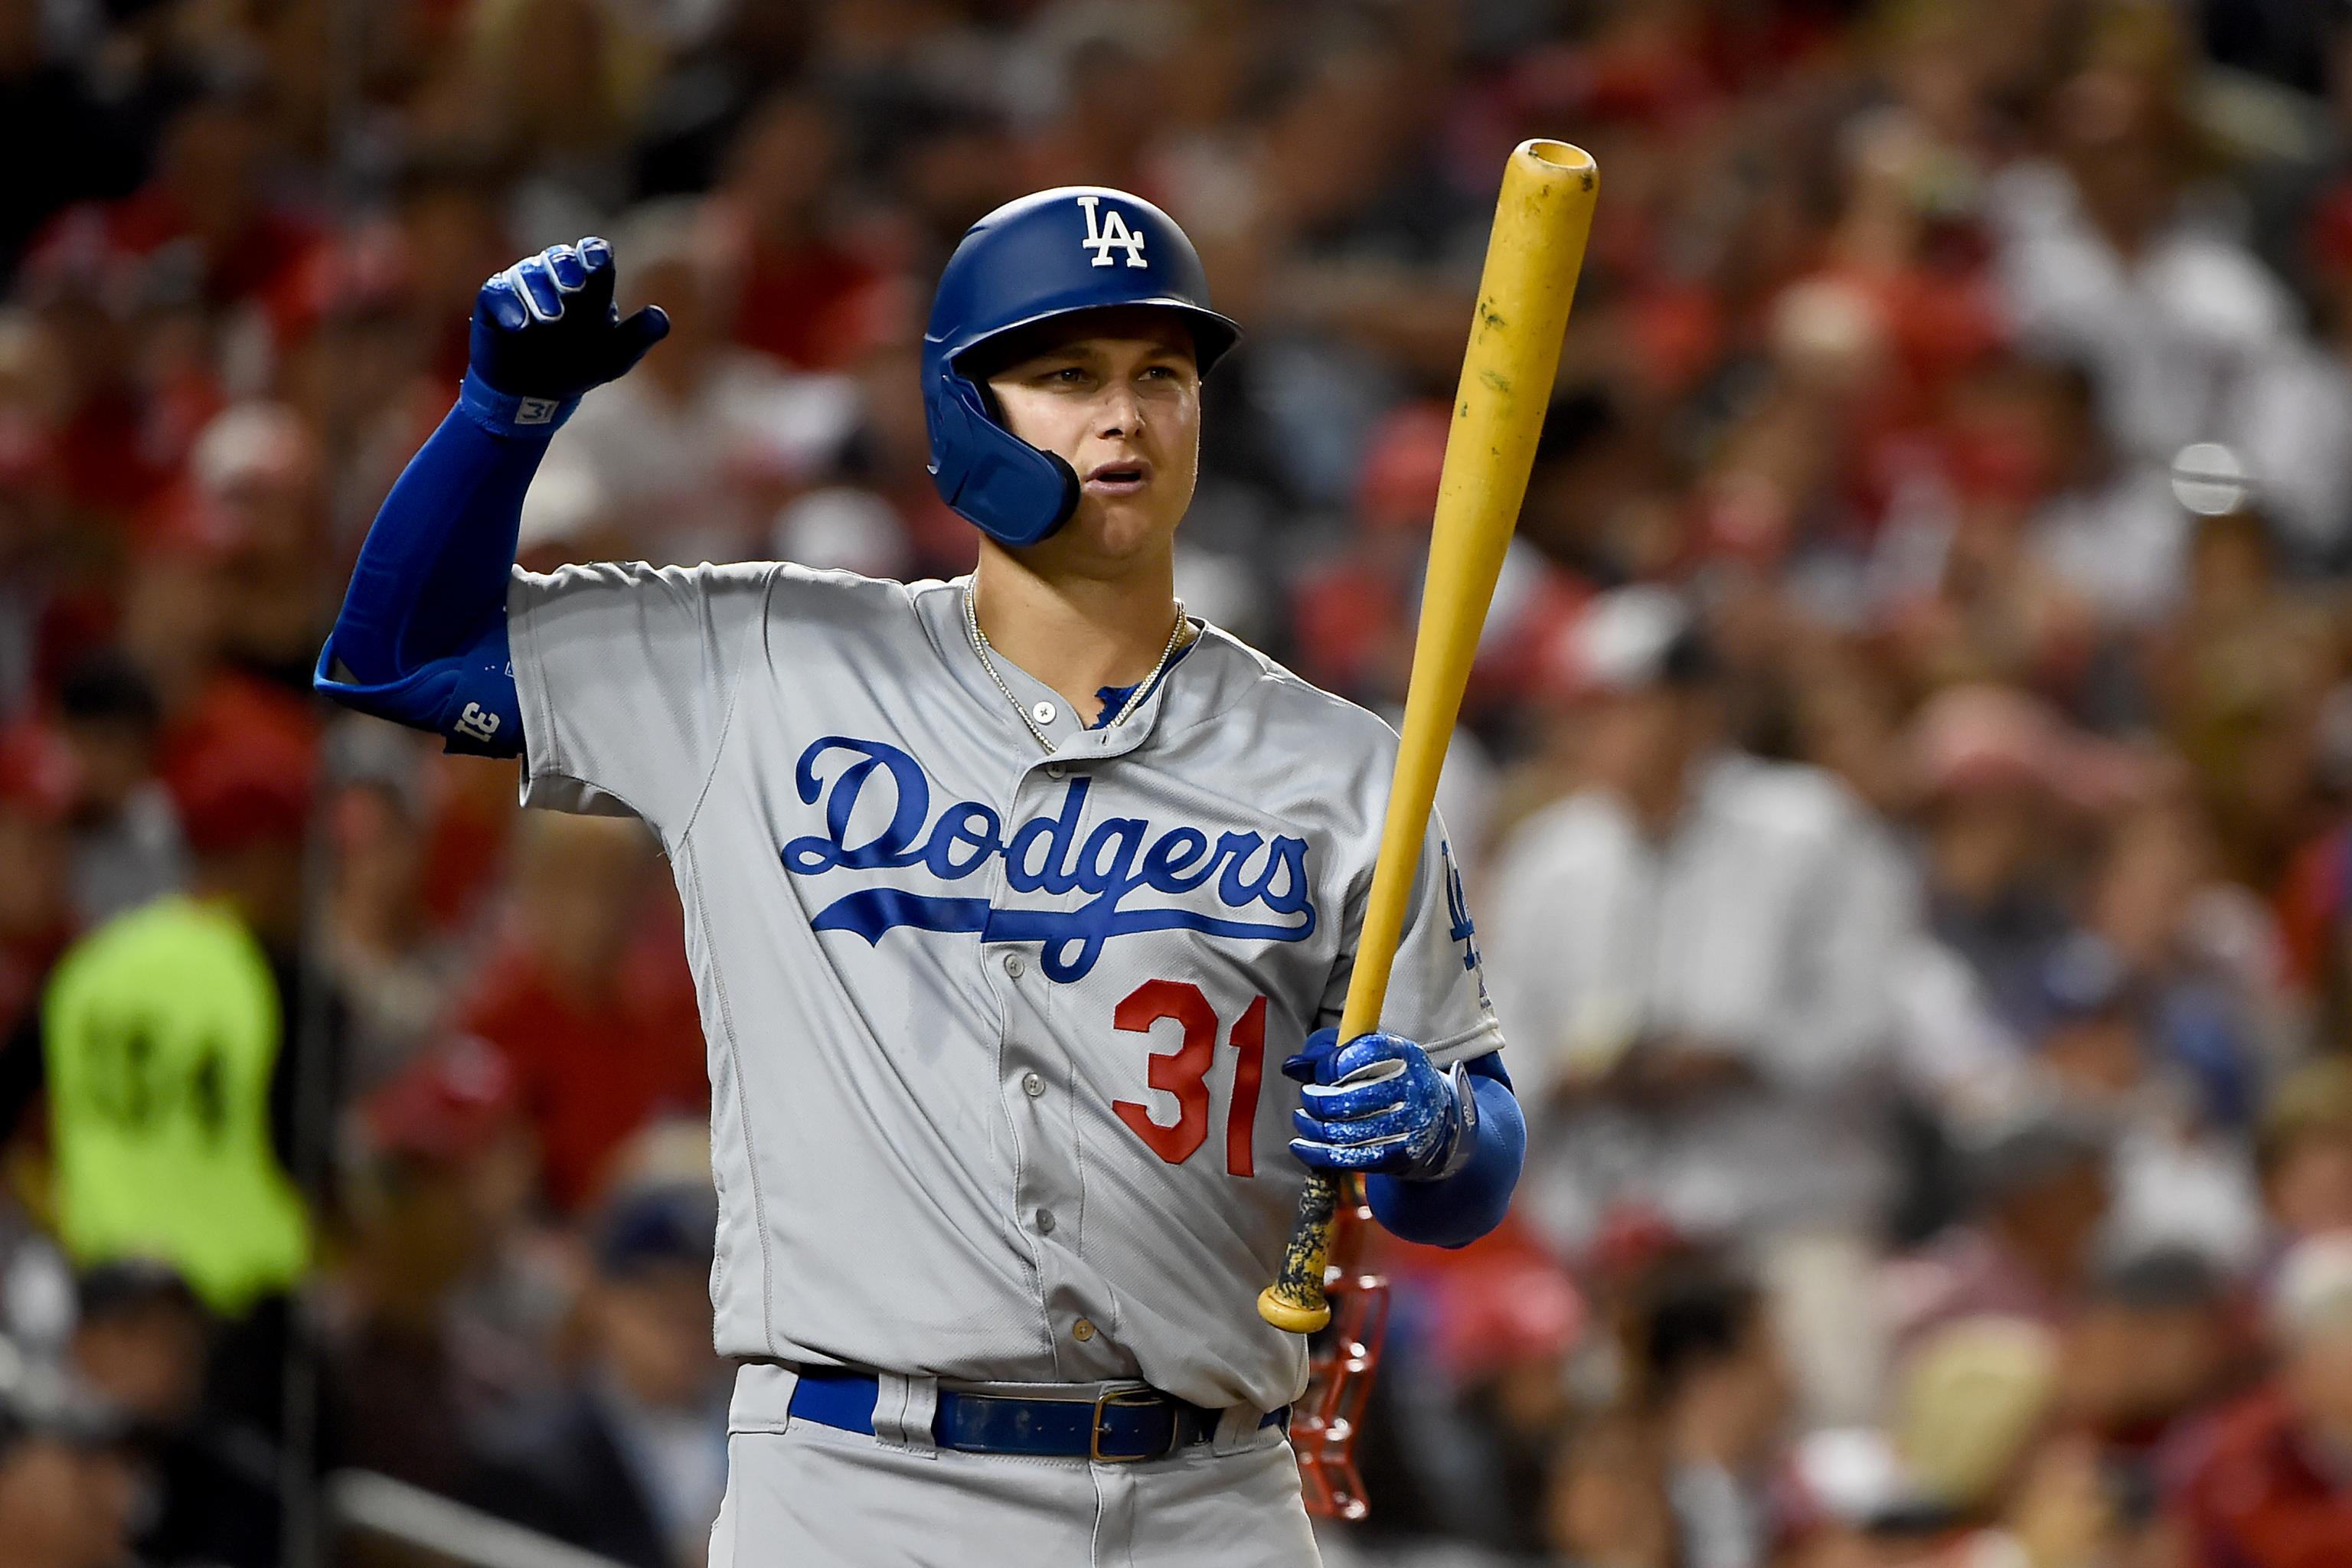 MLB Reportedly Rejected Dodgers' Request to Not Wear Players